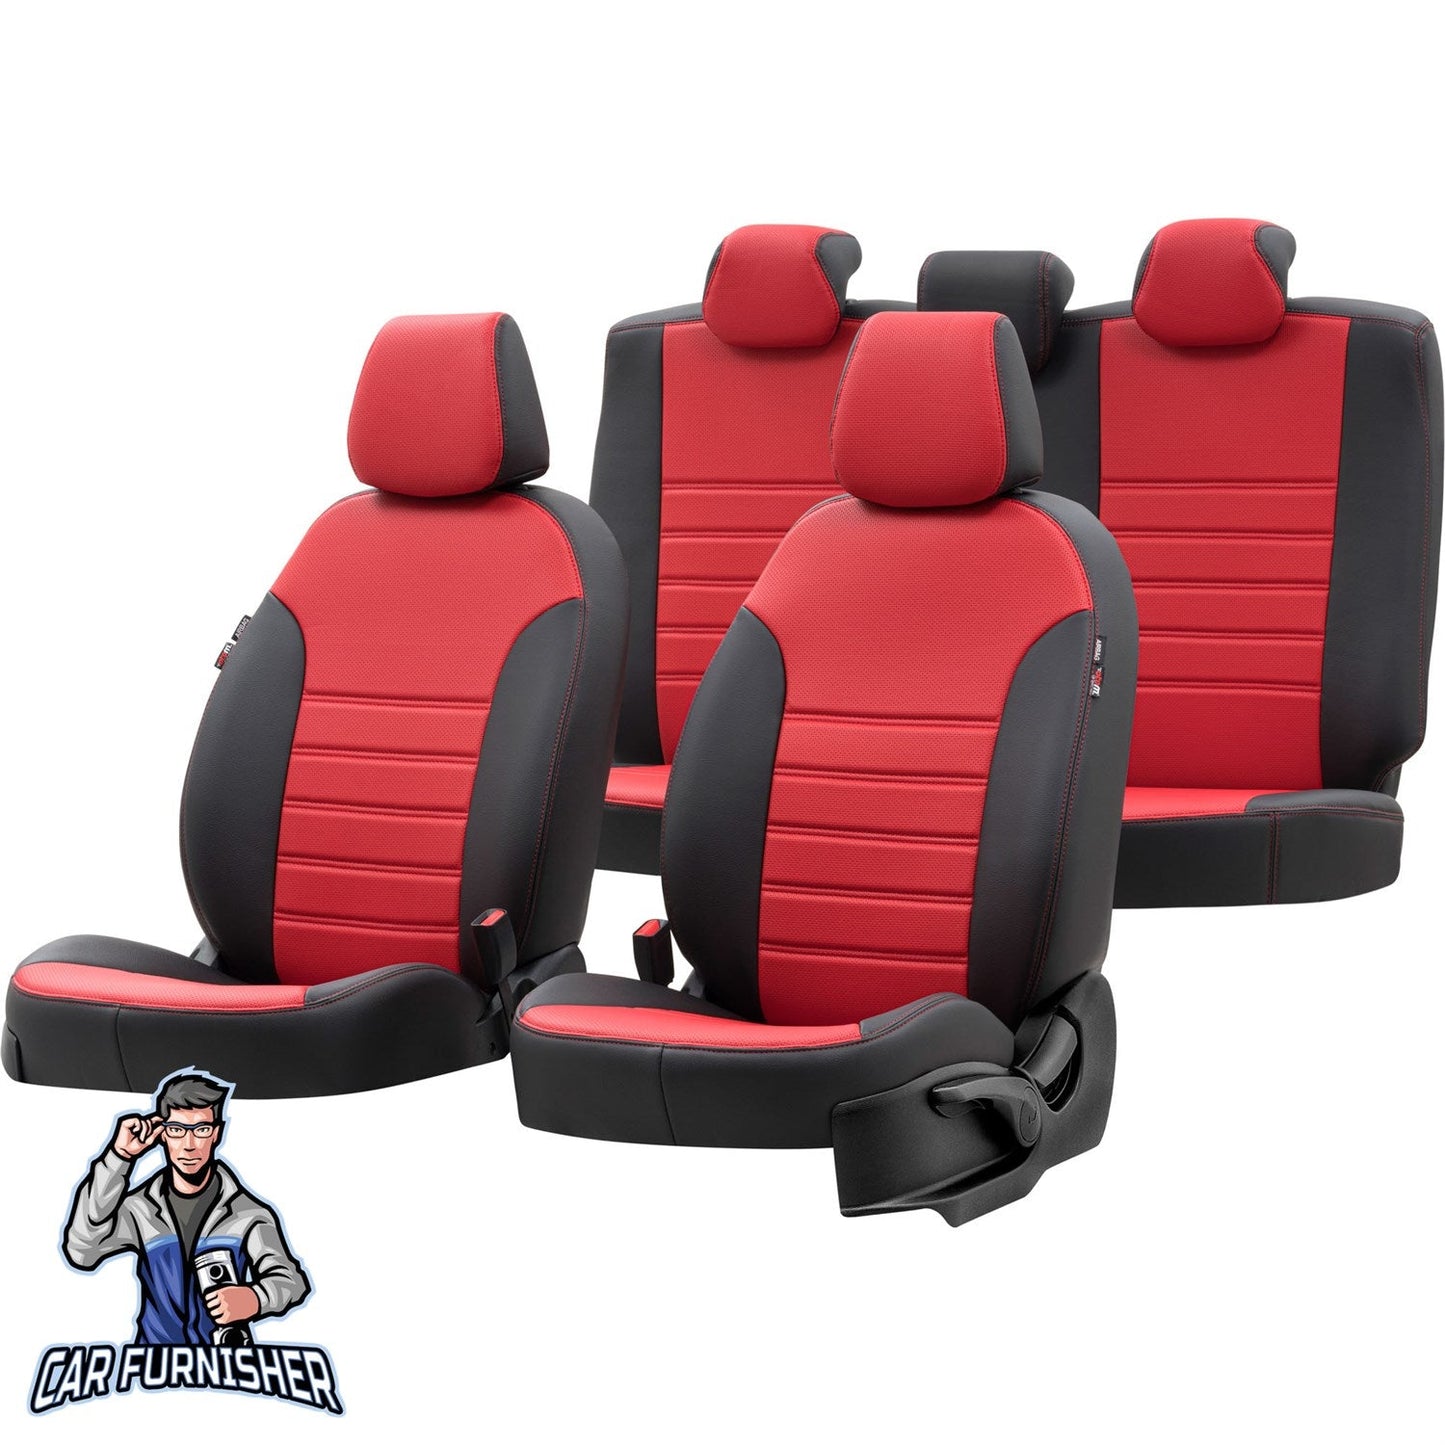 Volkswagen Transporter Seat Cover New York Leather Design Red Leather